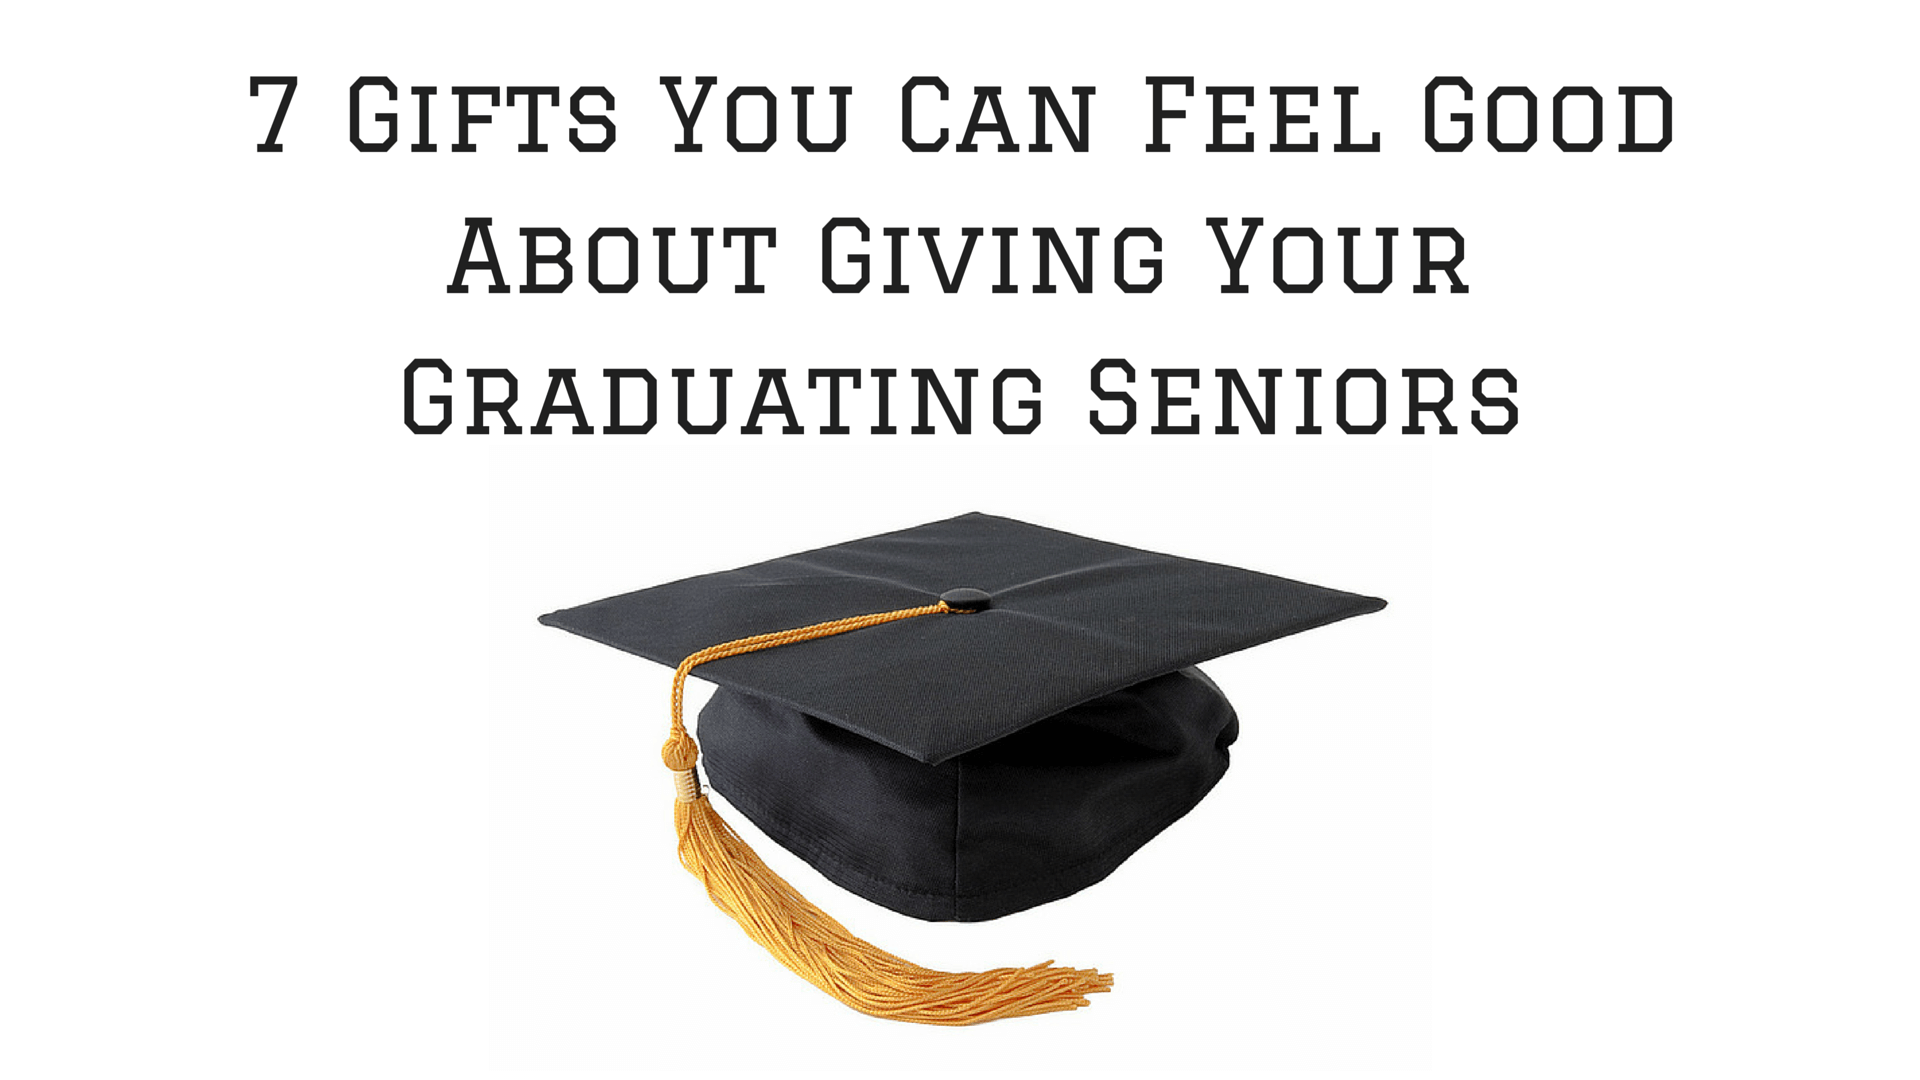 Gifts for Graduating Seniors at Your Church